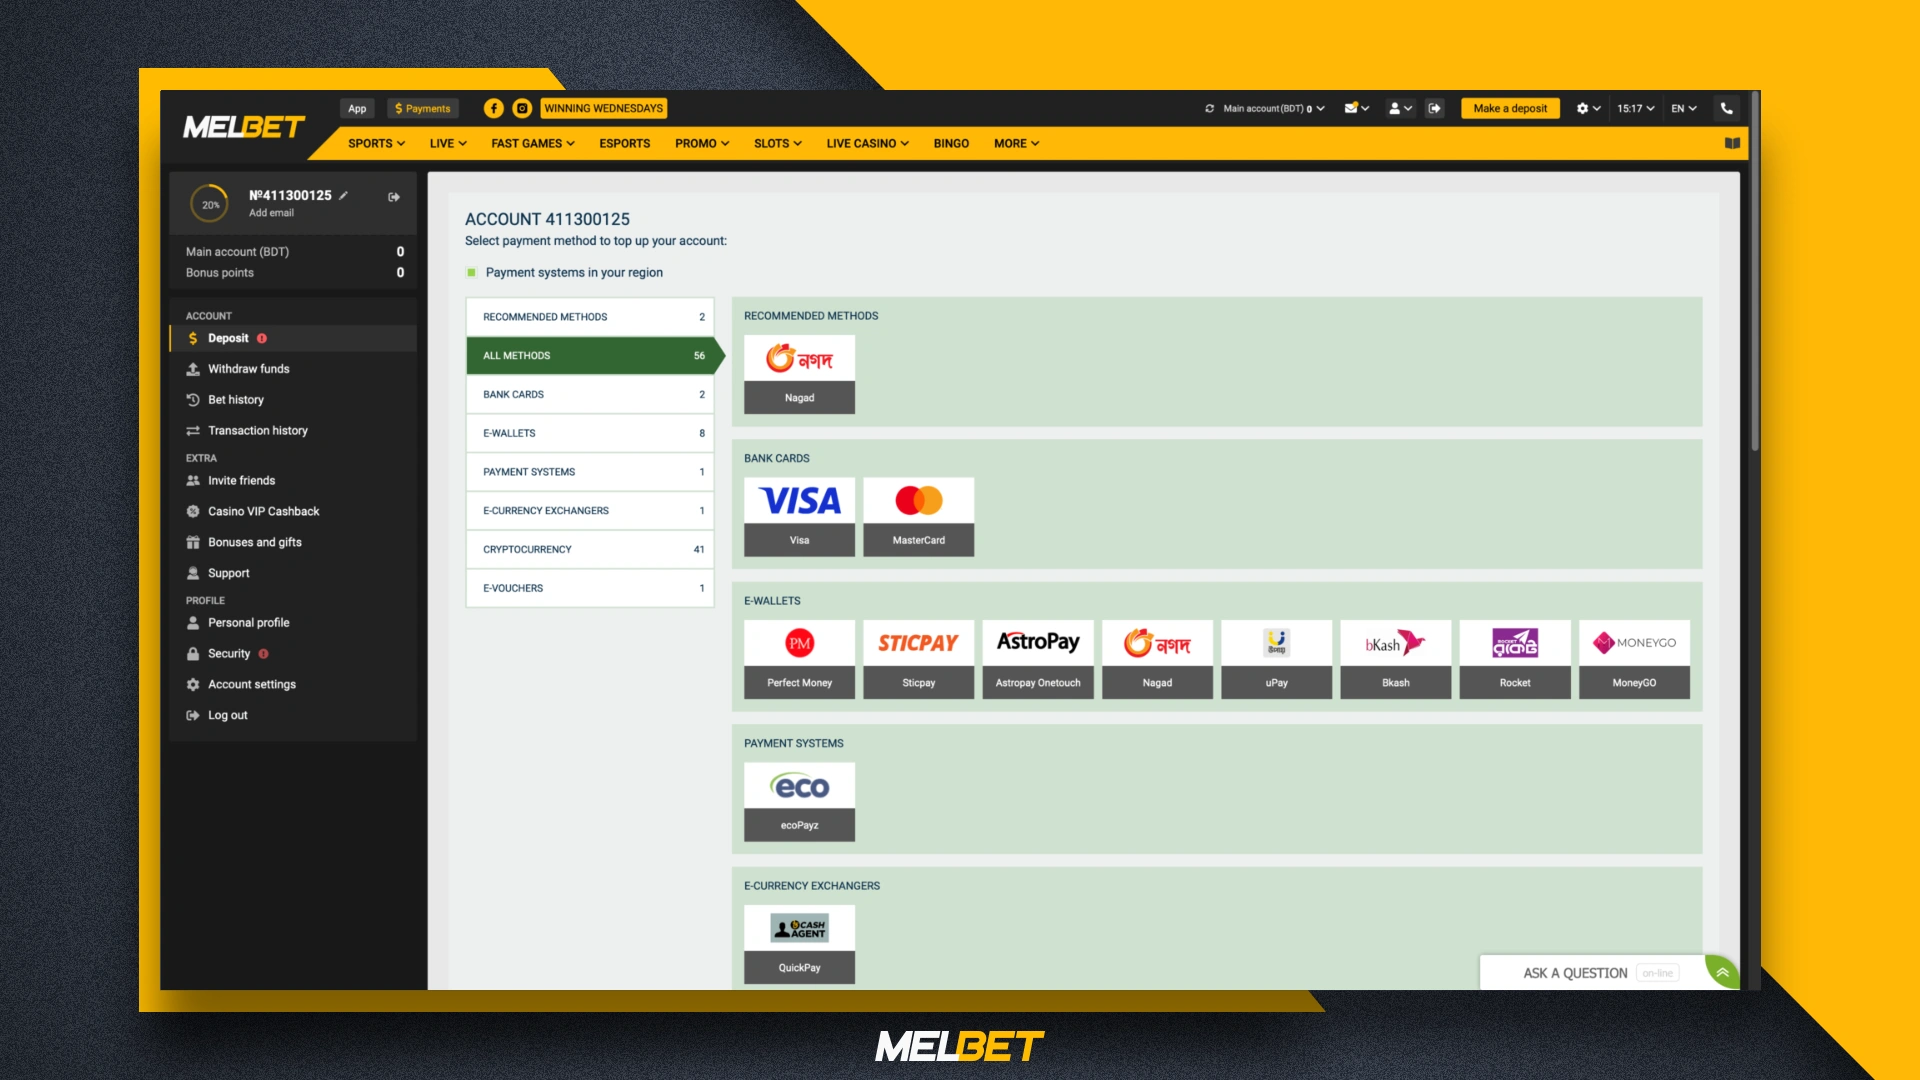 Go to the page where you can choose the most convenient payment method